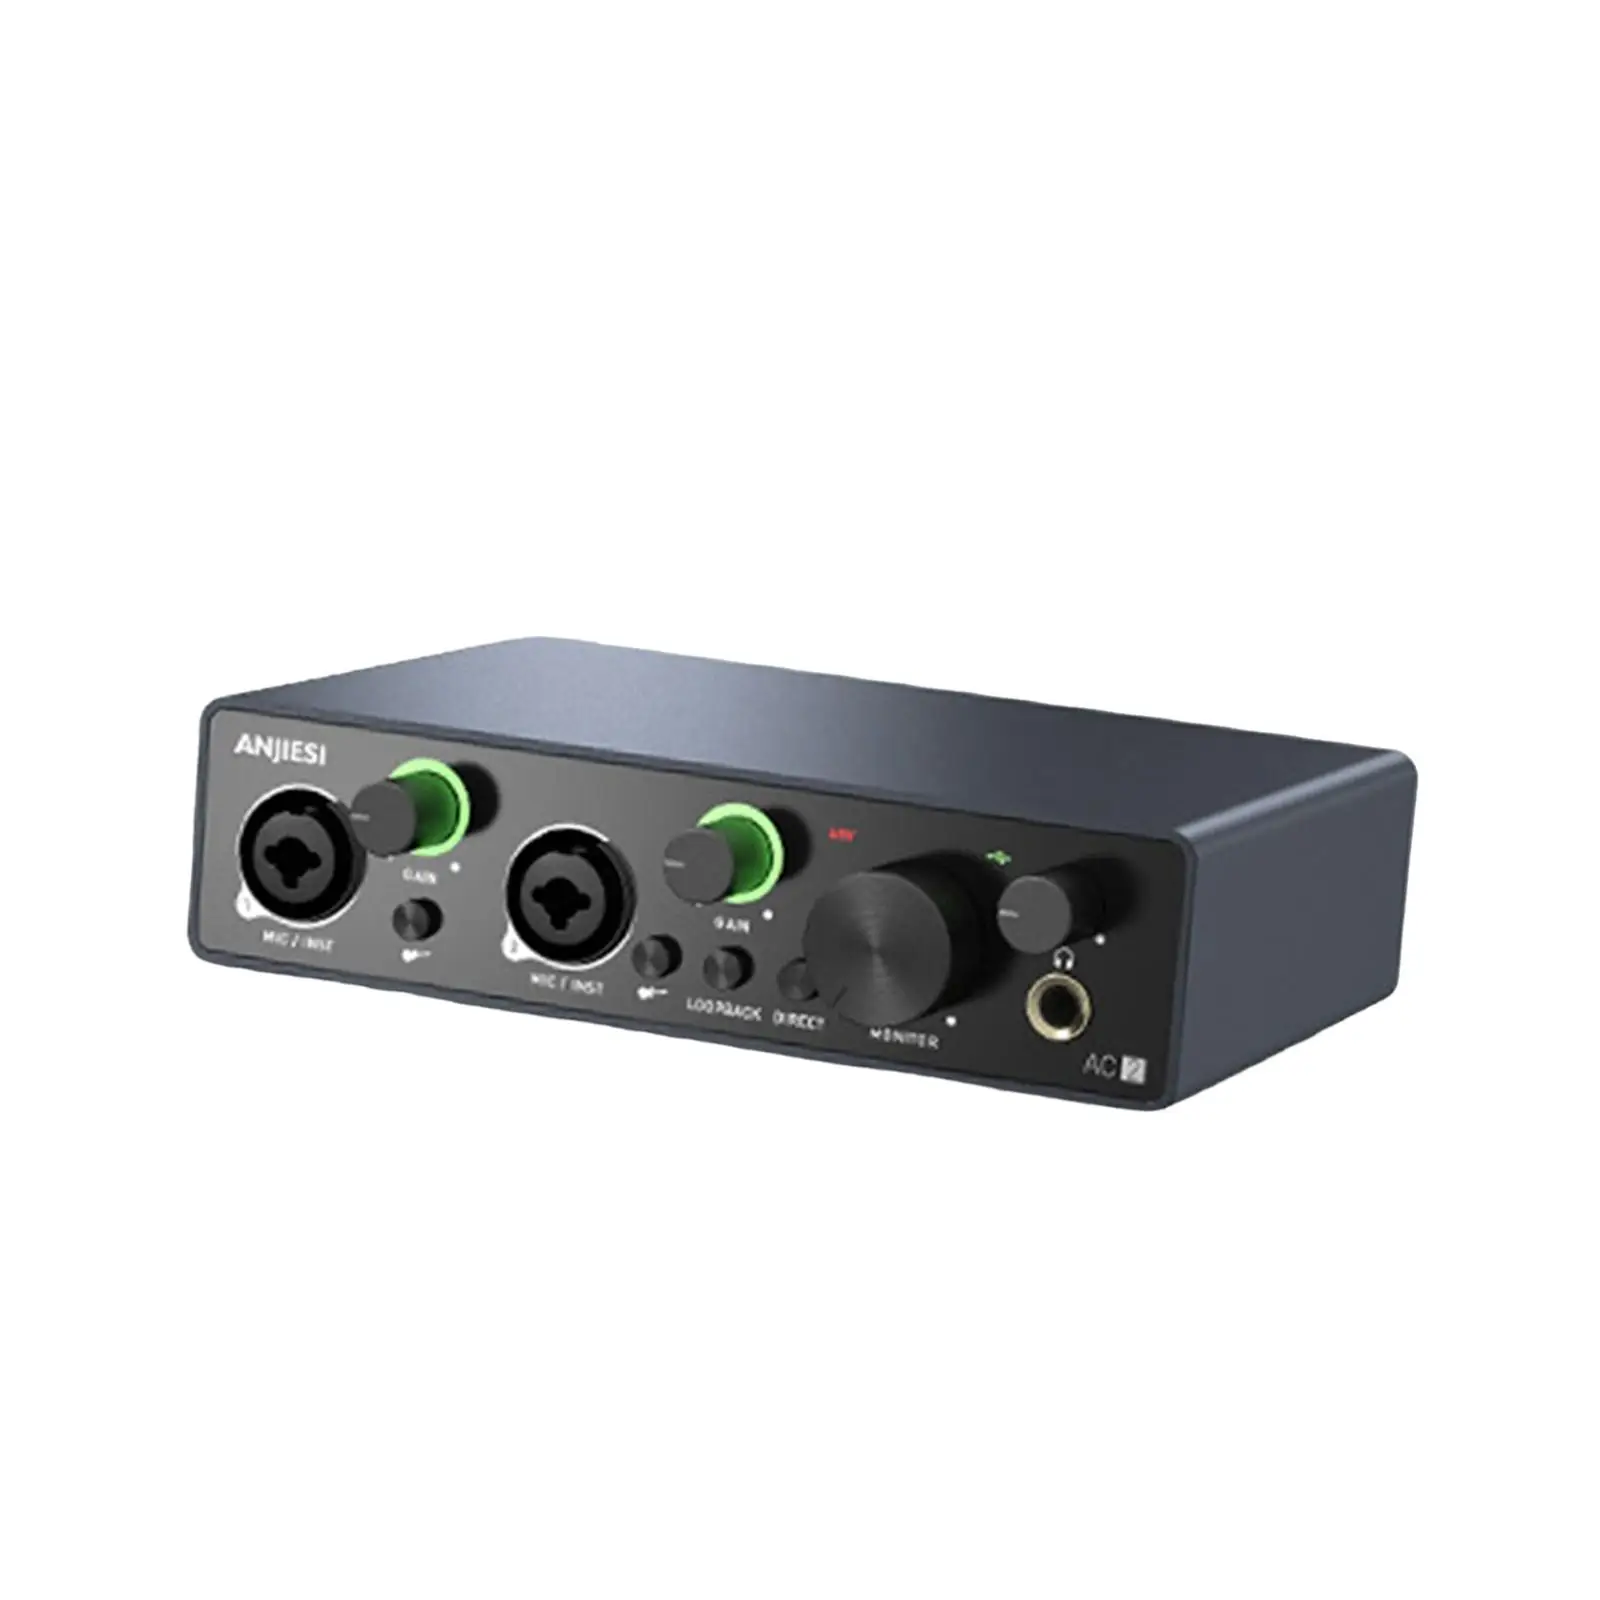 USB Audio Interface Portable Plug and Play Studio Quality Low Latency for Streaming Podcasting Vocalist Guitarist Podcaster